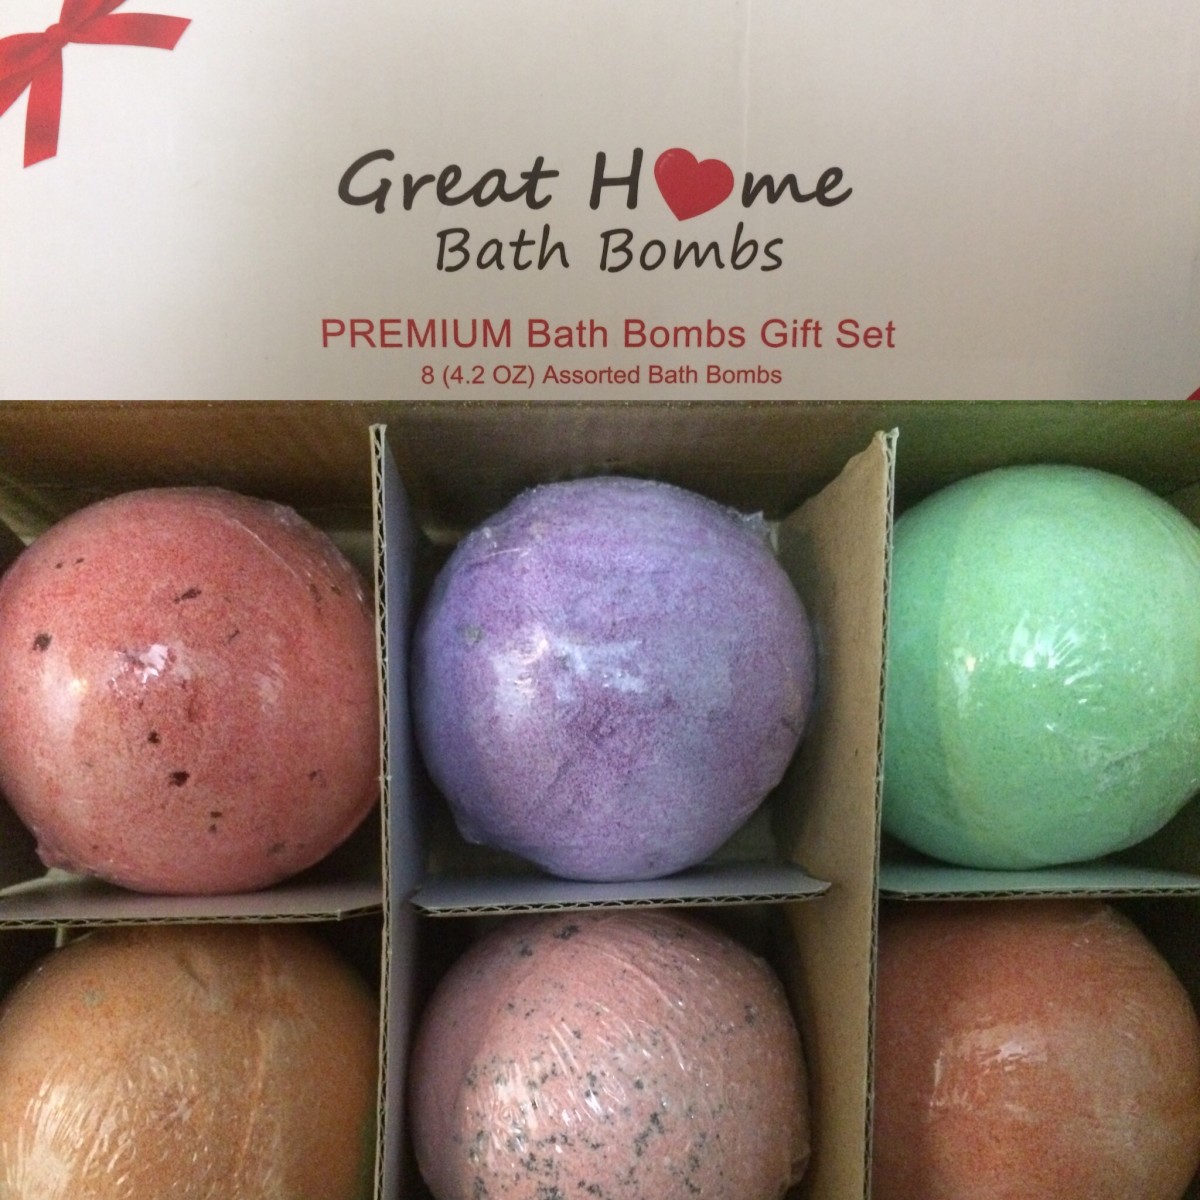 Get all the details on the Great Home Bath Bombs gift set. Find out whether or not it really makes a good gift.